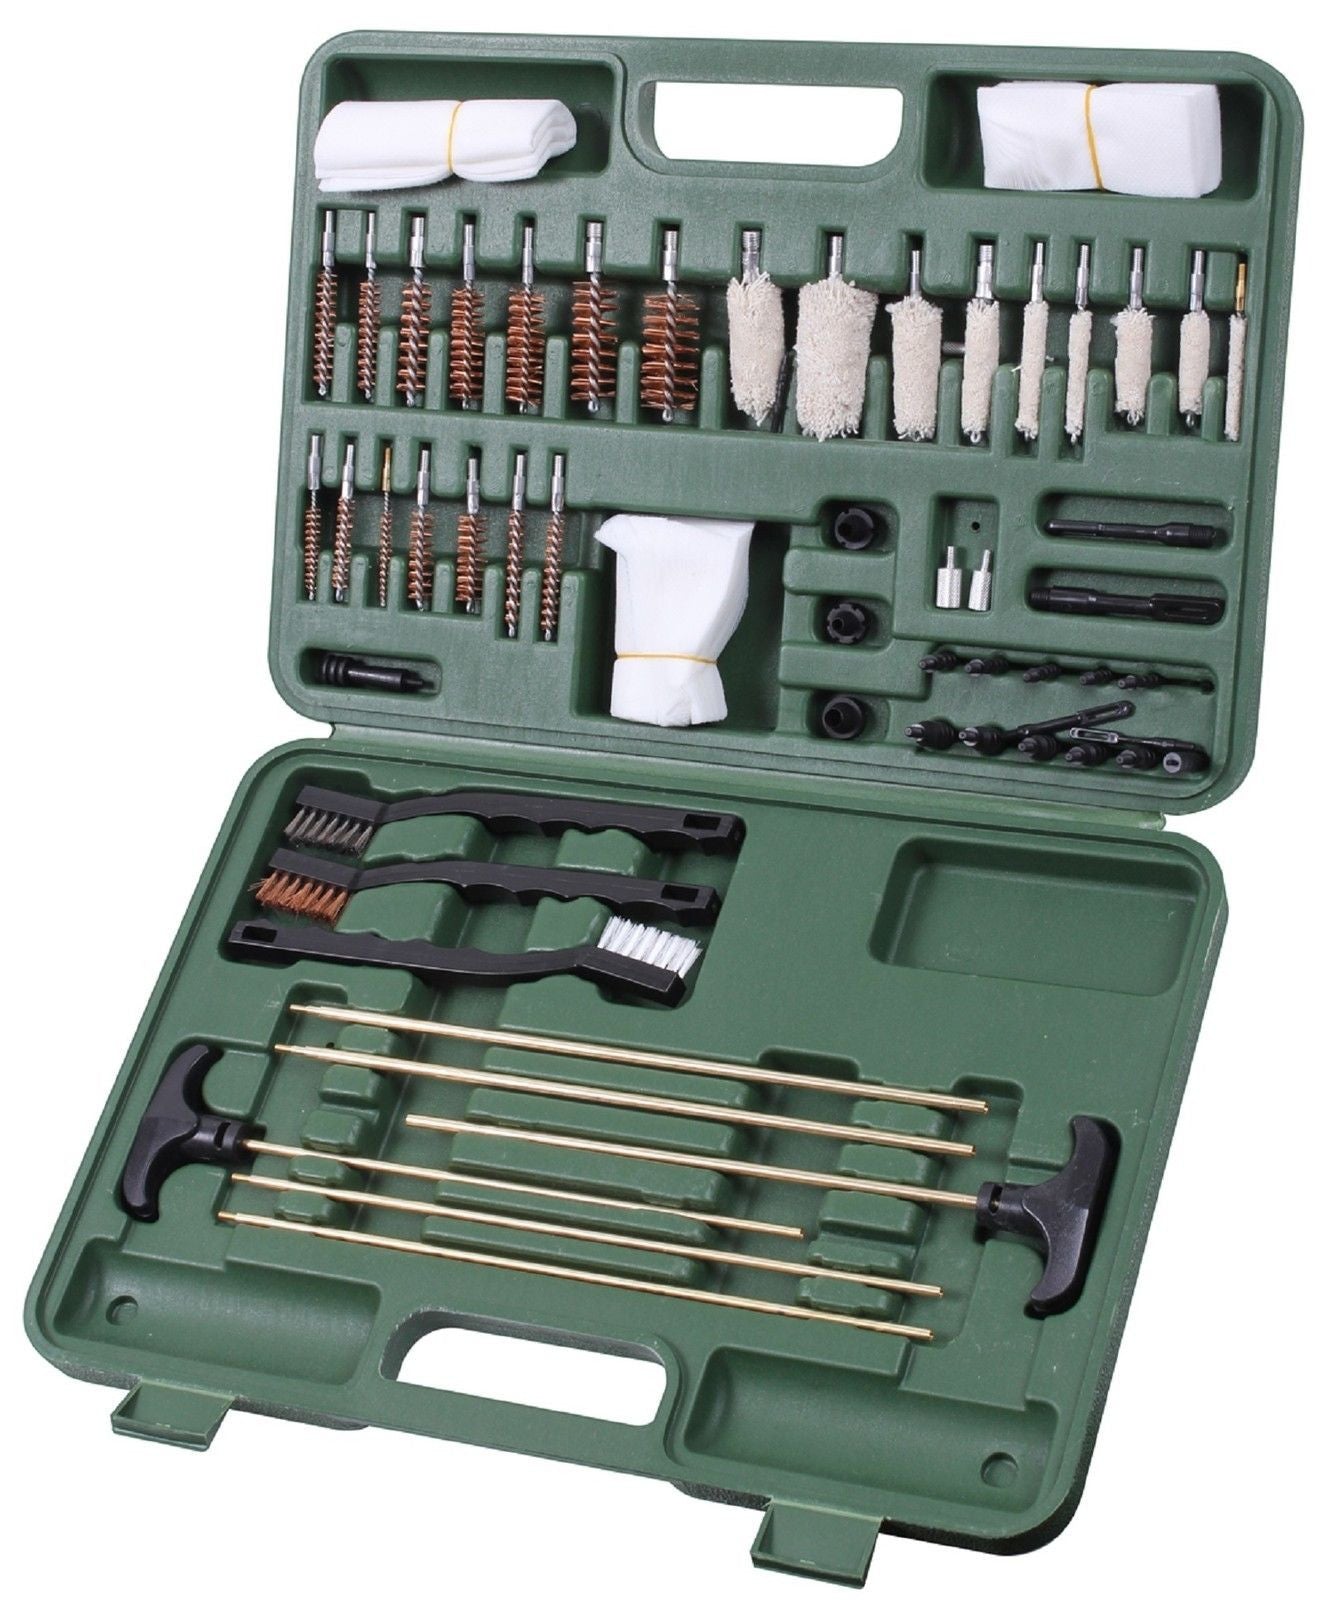 Universal Cleaning Kit - Rothco 159 Piece Kits